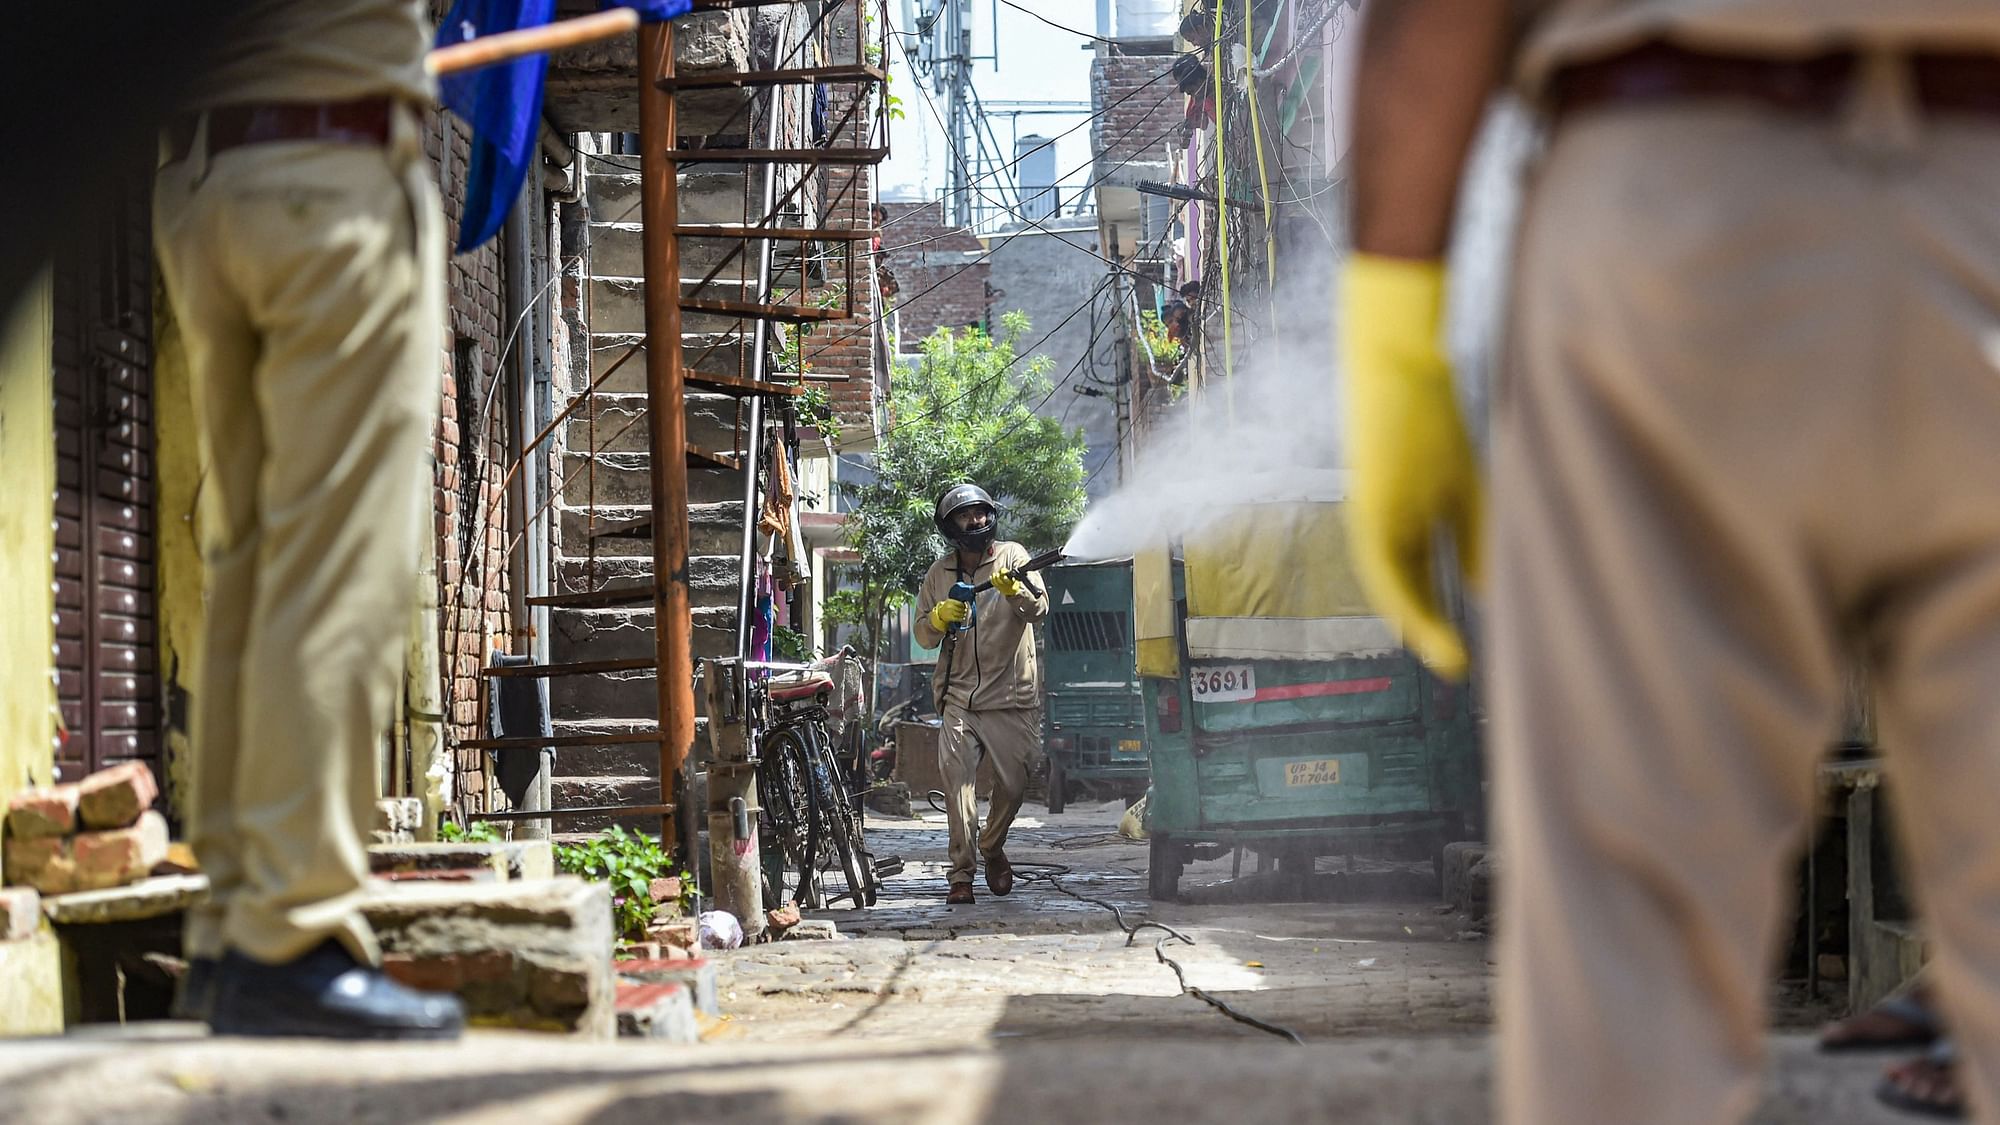 A worker sprays disinfectant at Nandgram village, marked as a COVID-19 hotspot, during the nationwide lockdown to curb the spread of coronavirus, in Ghaziabad. (Representational image)